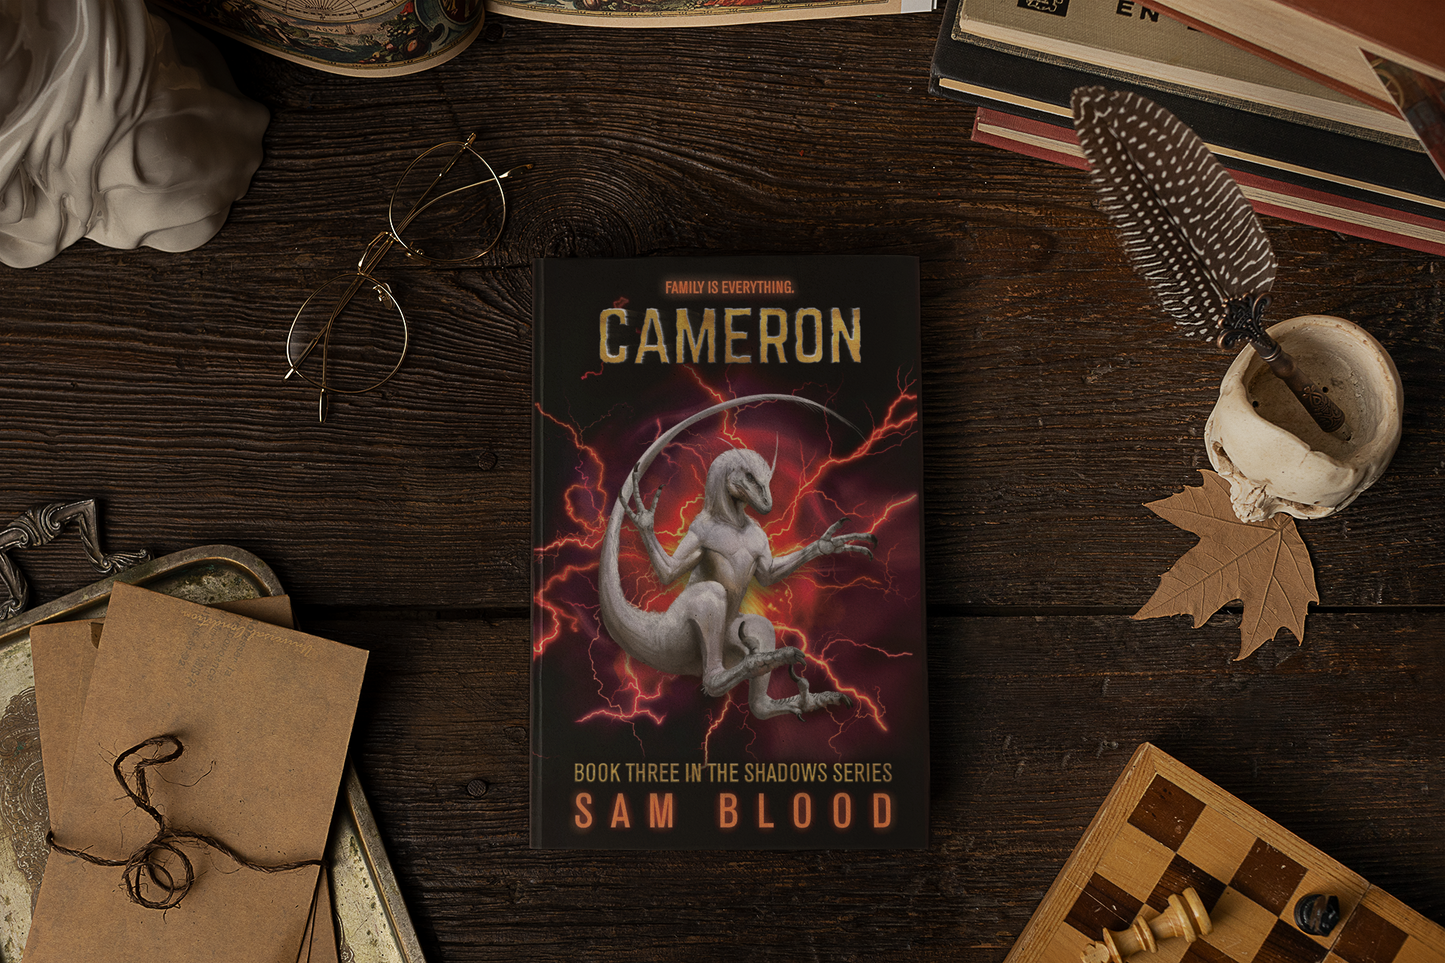 Cameron (Book Three in the Shadows Series) - NZ POSTAGE